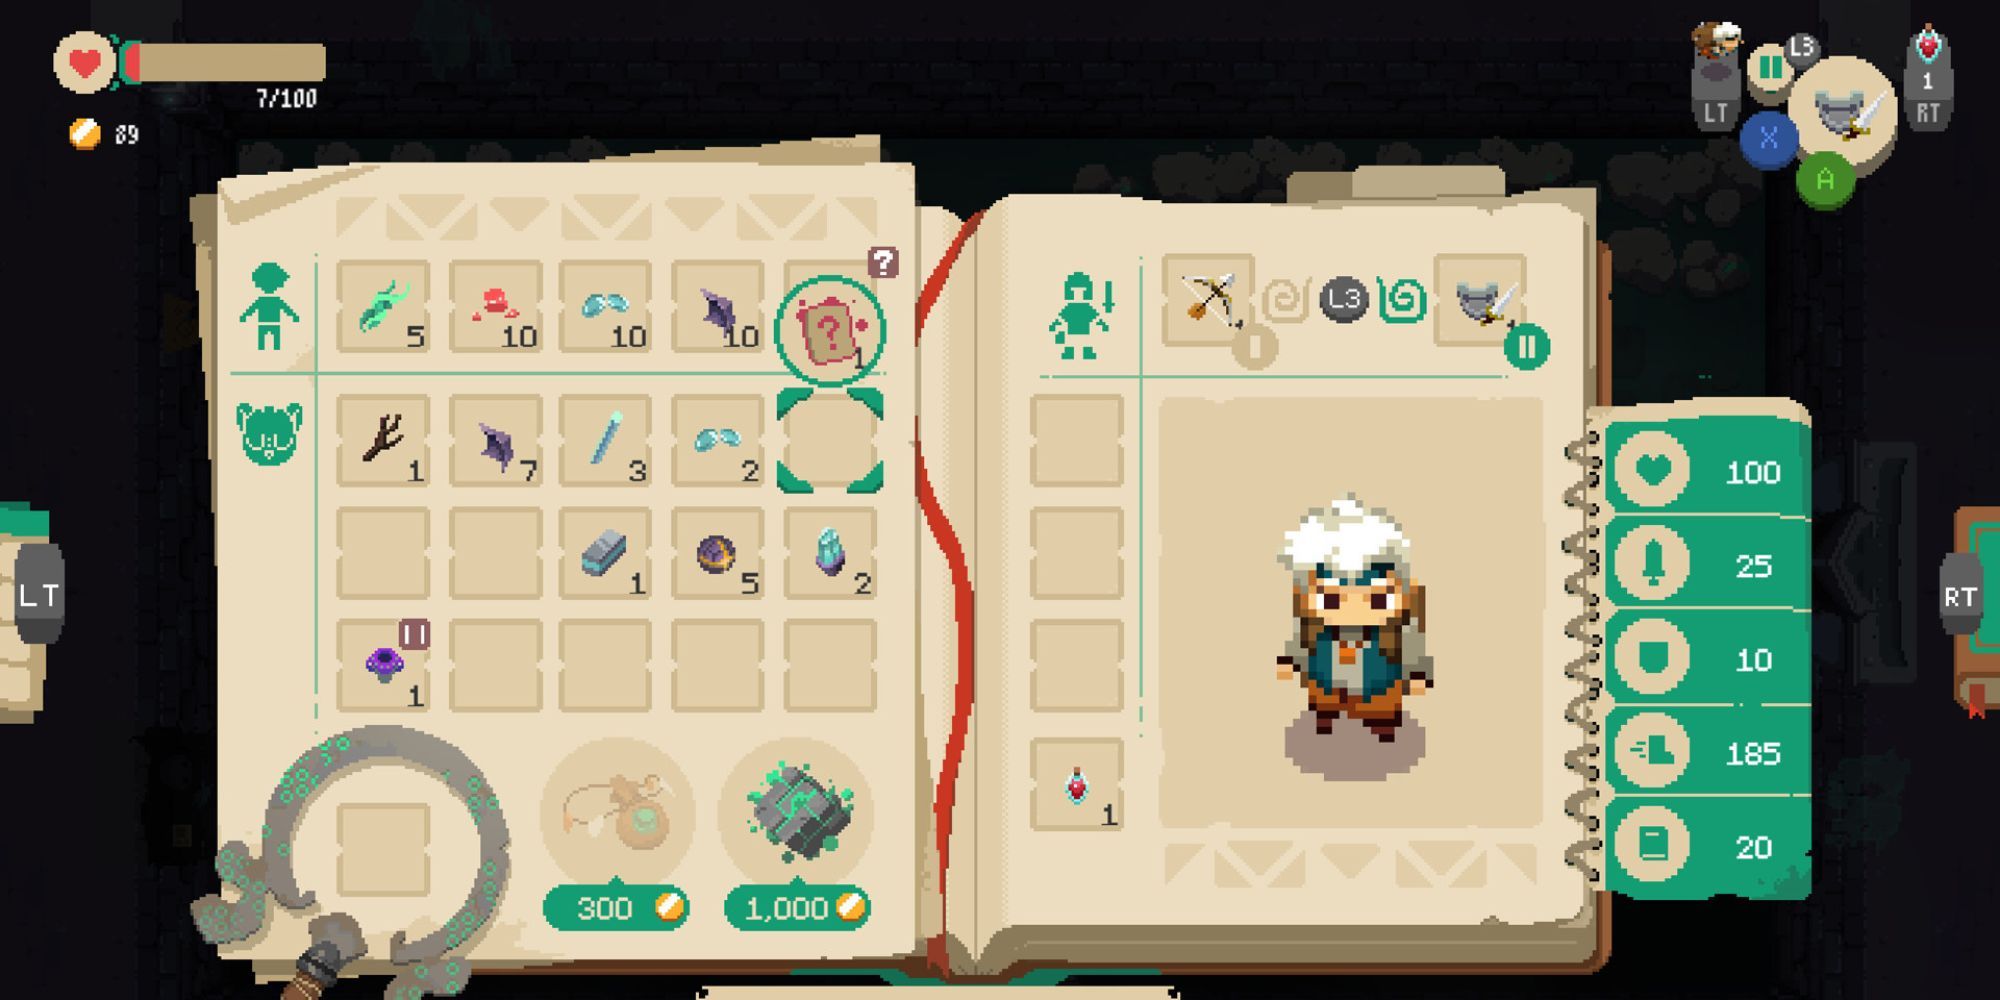 Moonlighter showing the inventory of Will